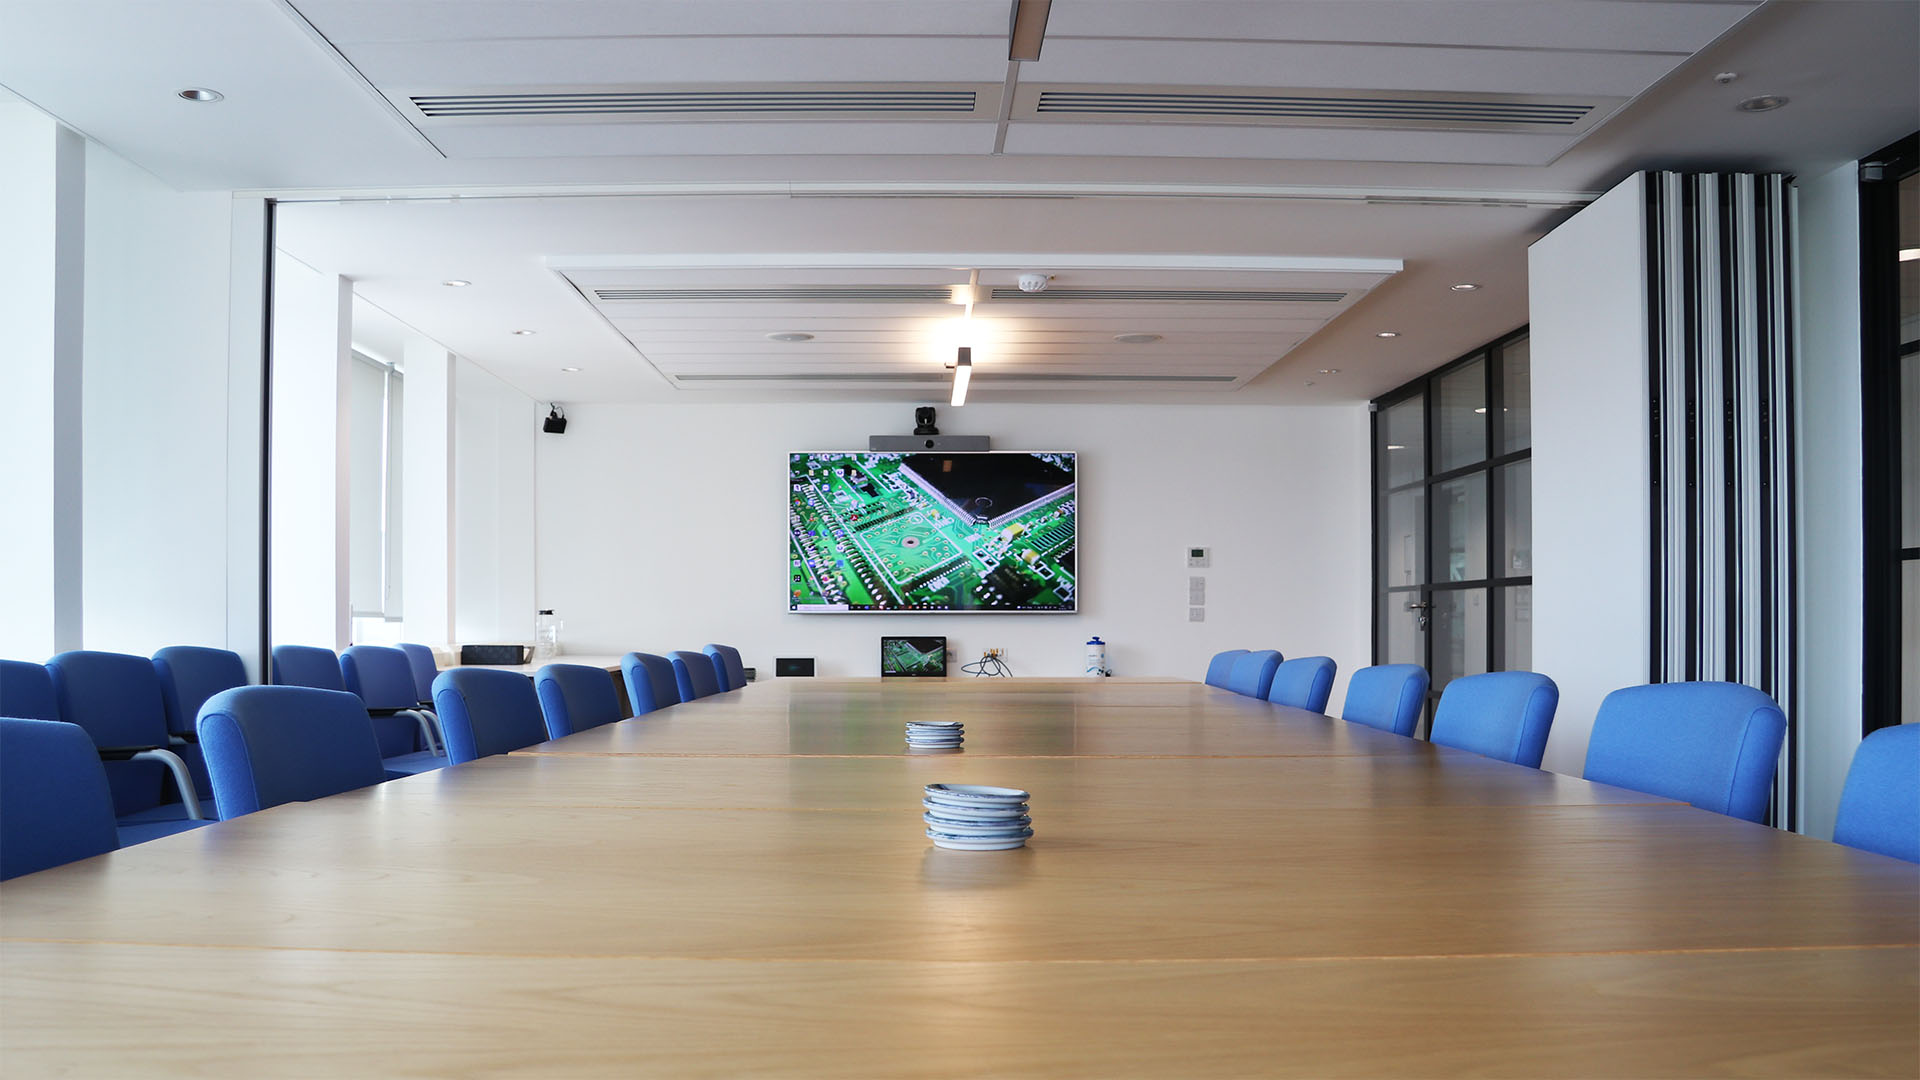 Basic videoconference meeting rooms